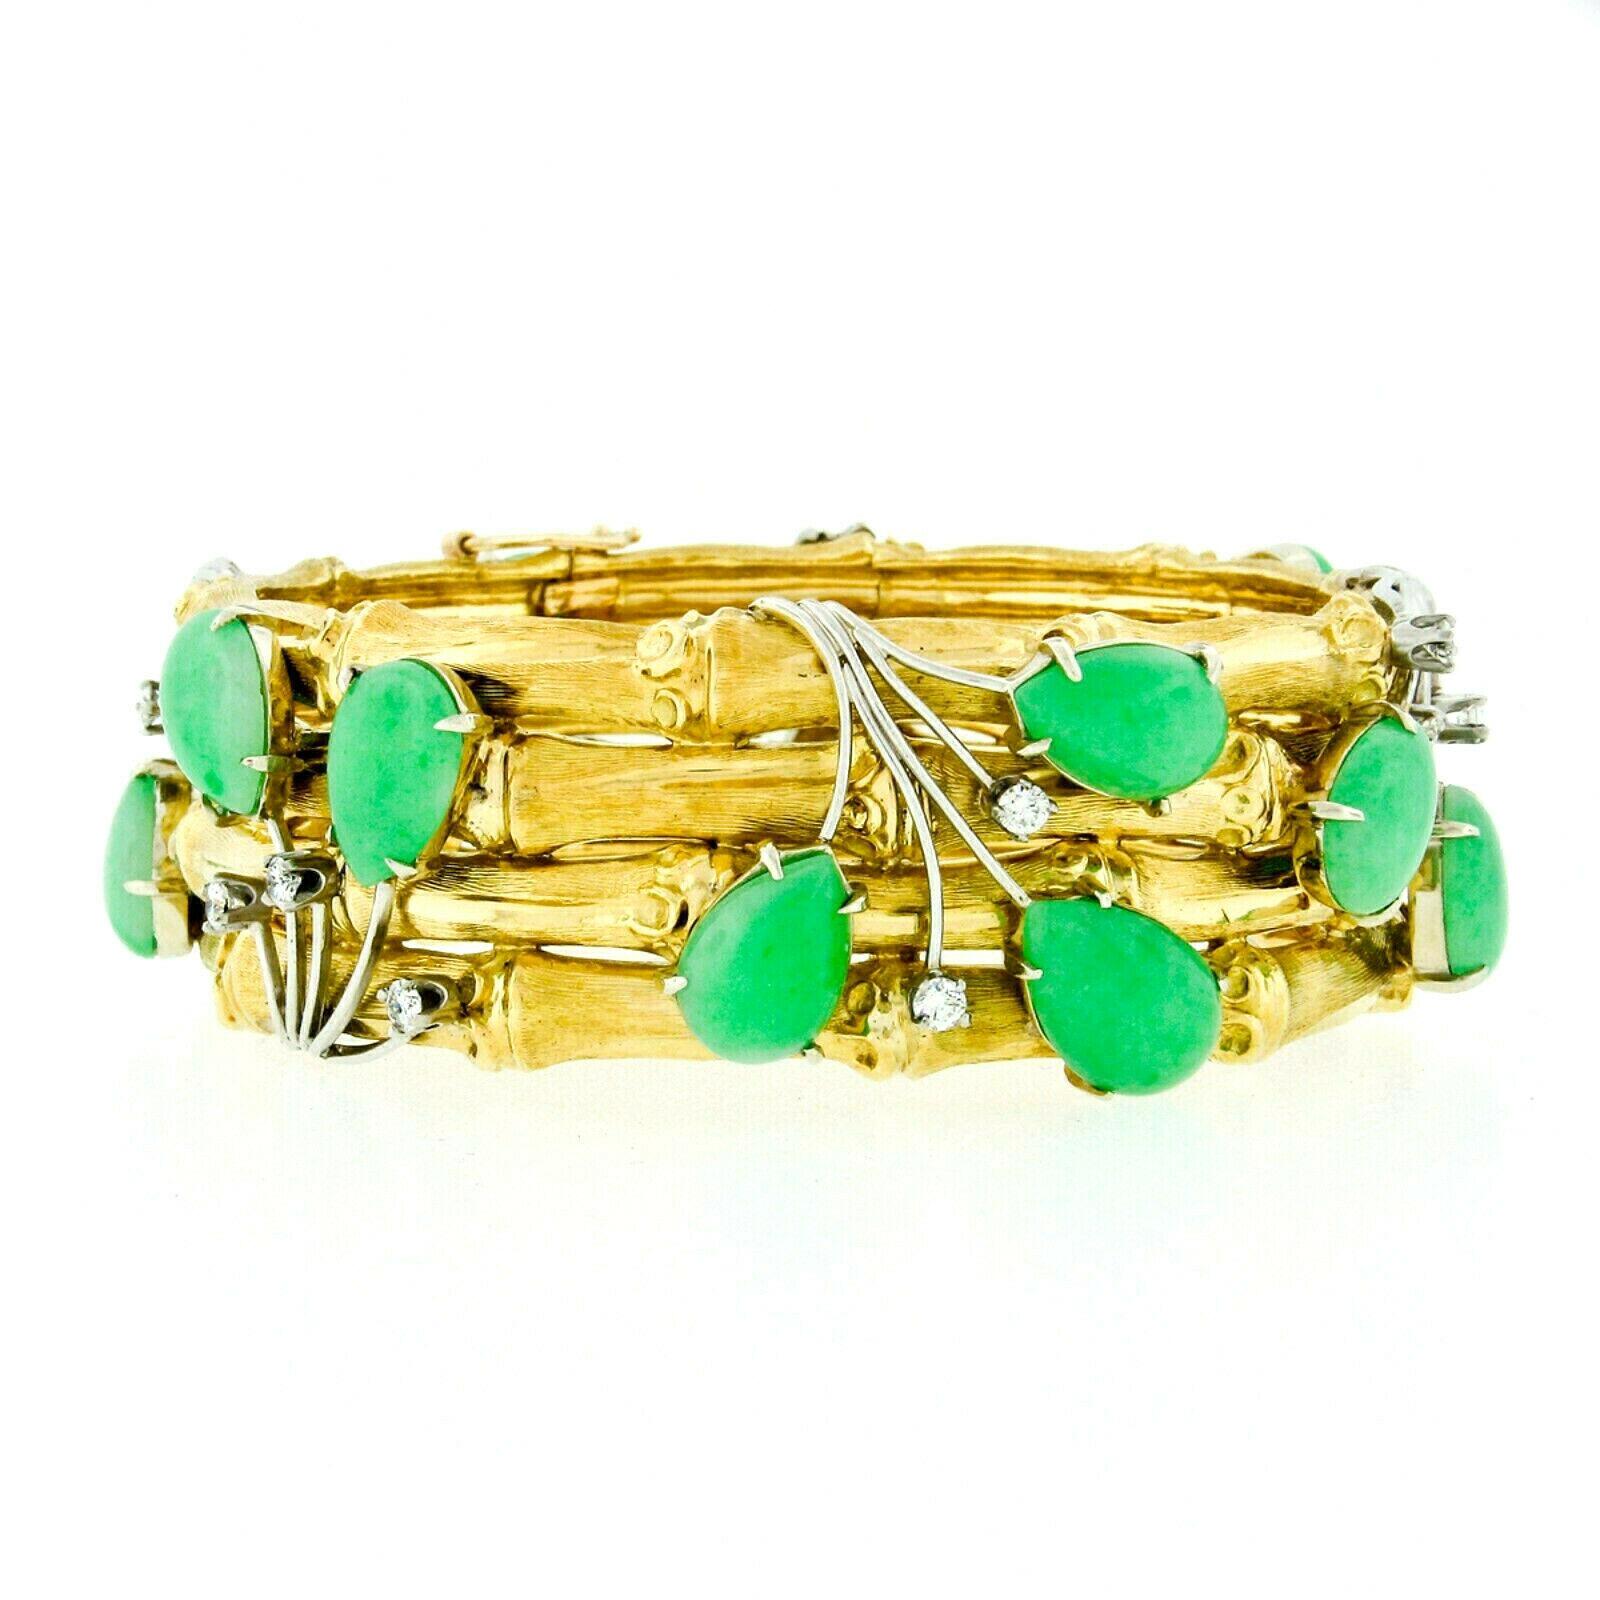 Here we have a magnificent vintage cuff-style bangle bracelet which was crafted from solid 18k yellow gold and solid platinum wire. The cuff features 14 pear cabochon cut jadeite stones that are prong set into platinum baskets at the end of the